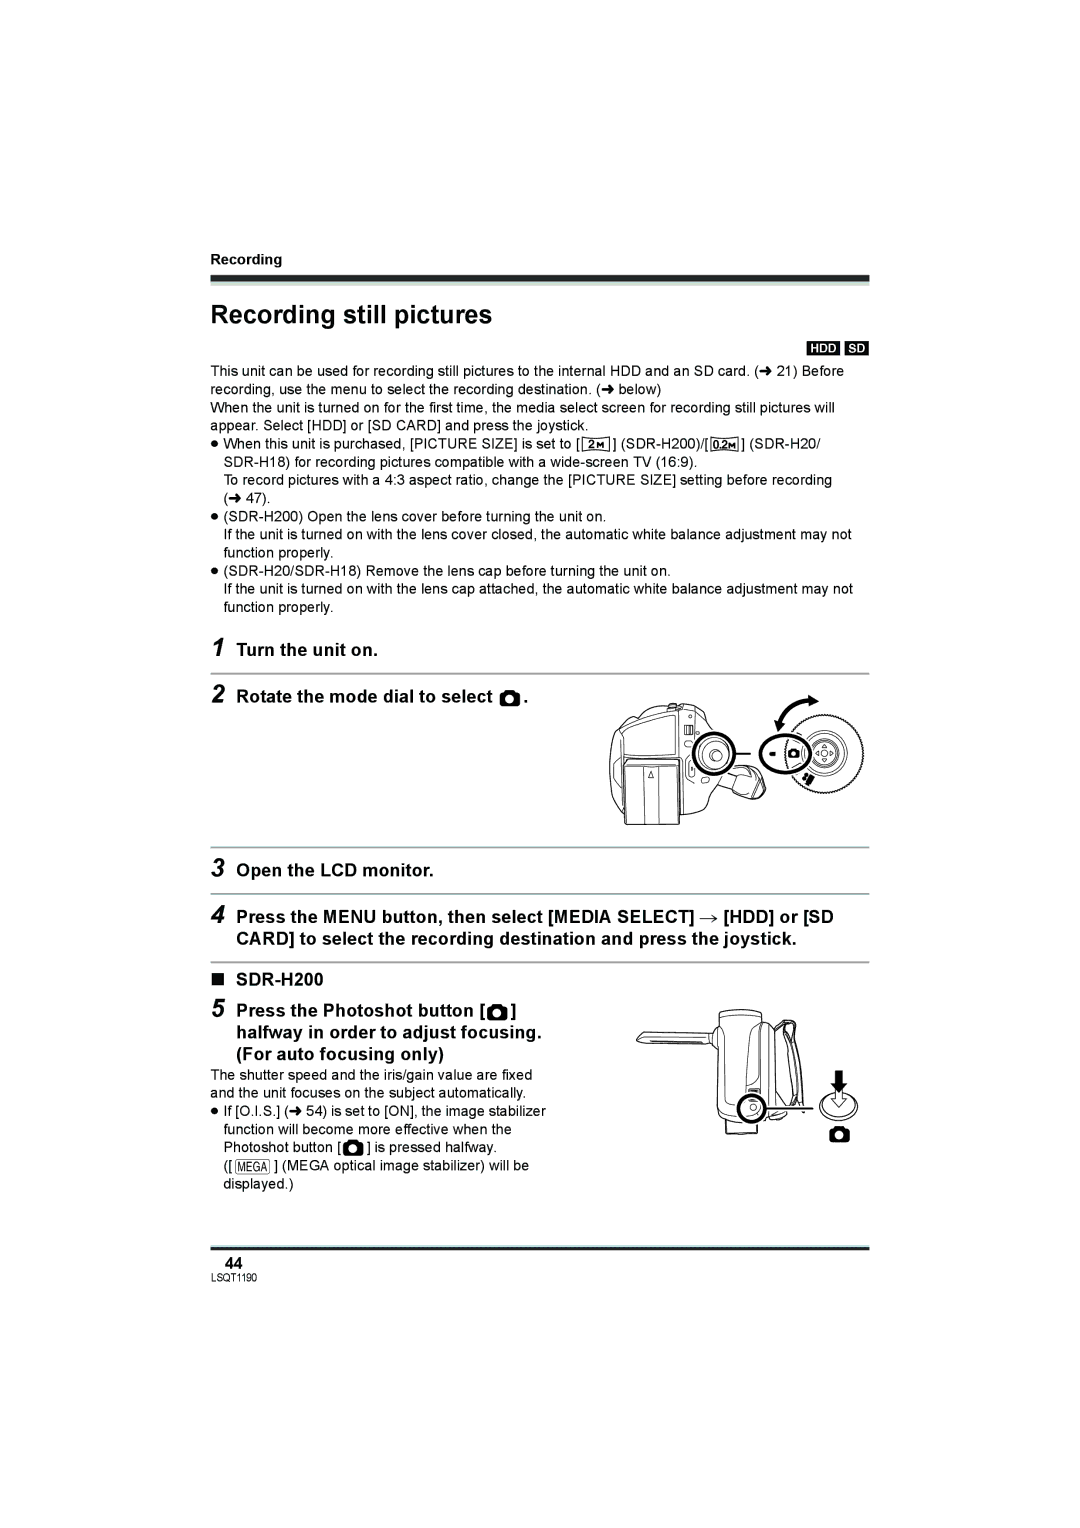 Panasonic SDR-H18, SDR-H200 operating instructions Recording still pictures 